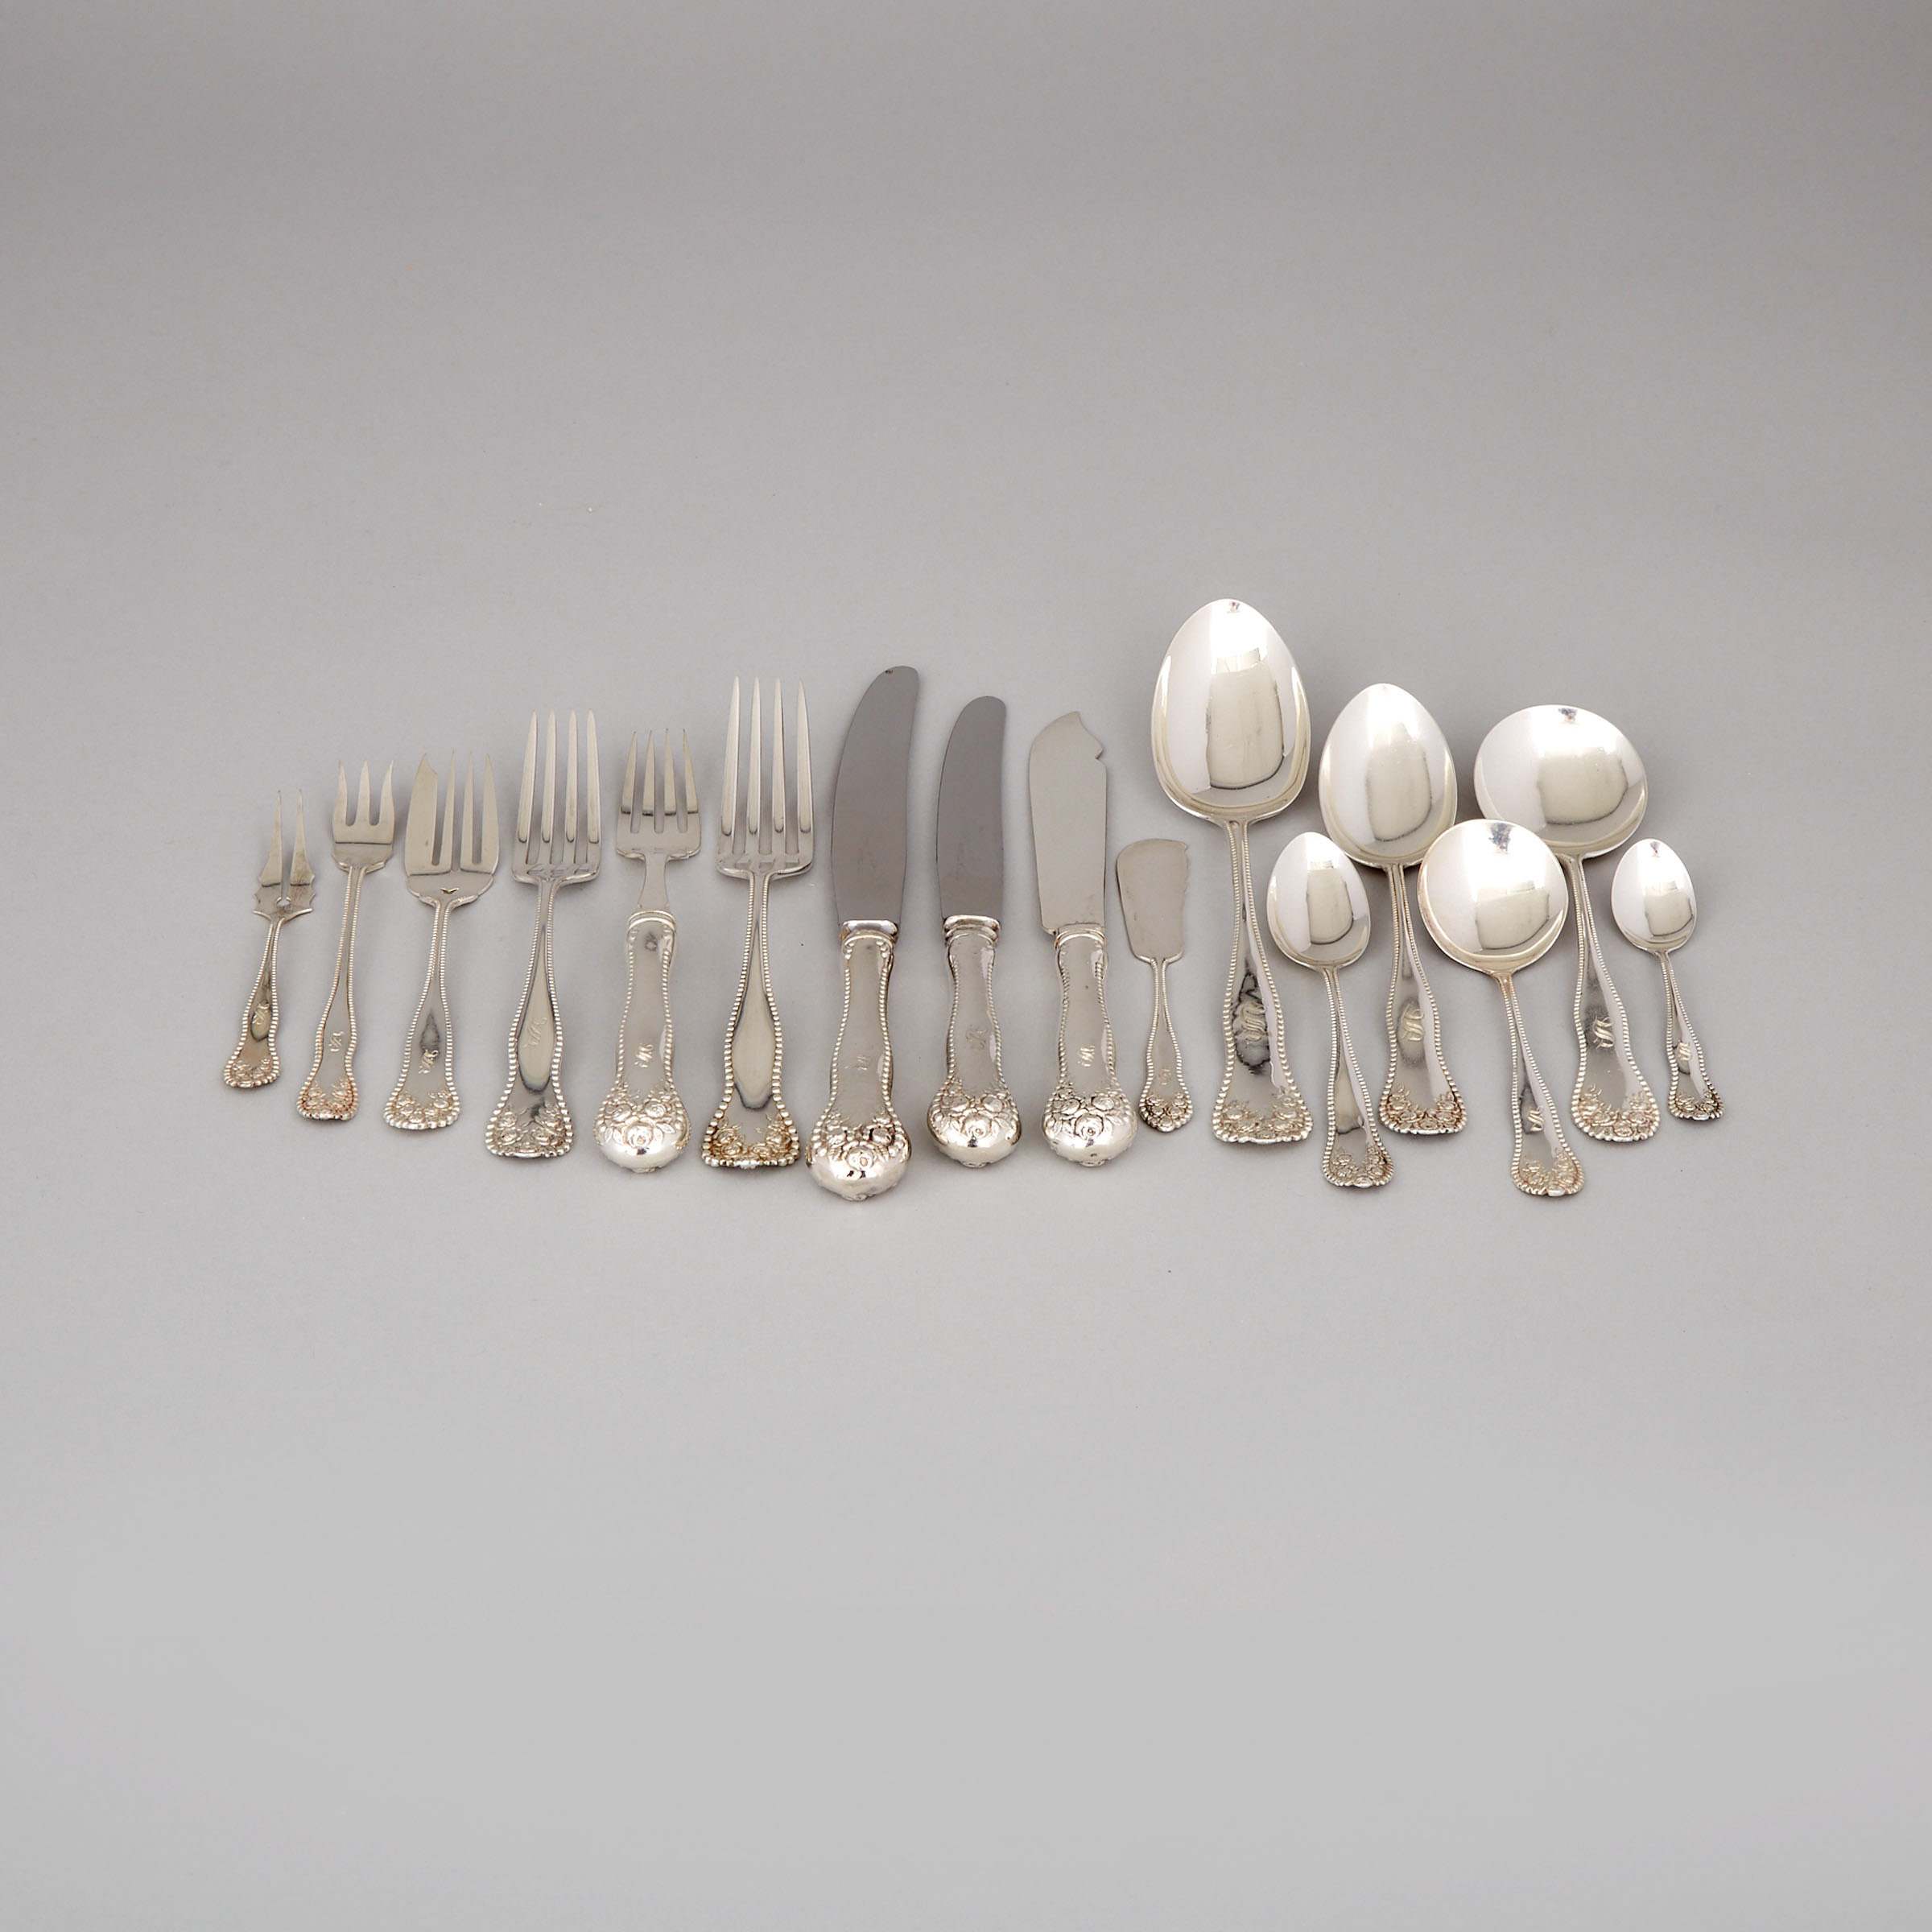 American Silver 'Lancaster' Flatware Service, mainly Gorham Mfg. Co., Providence, R.I., late 19th/early 20th century